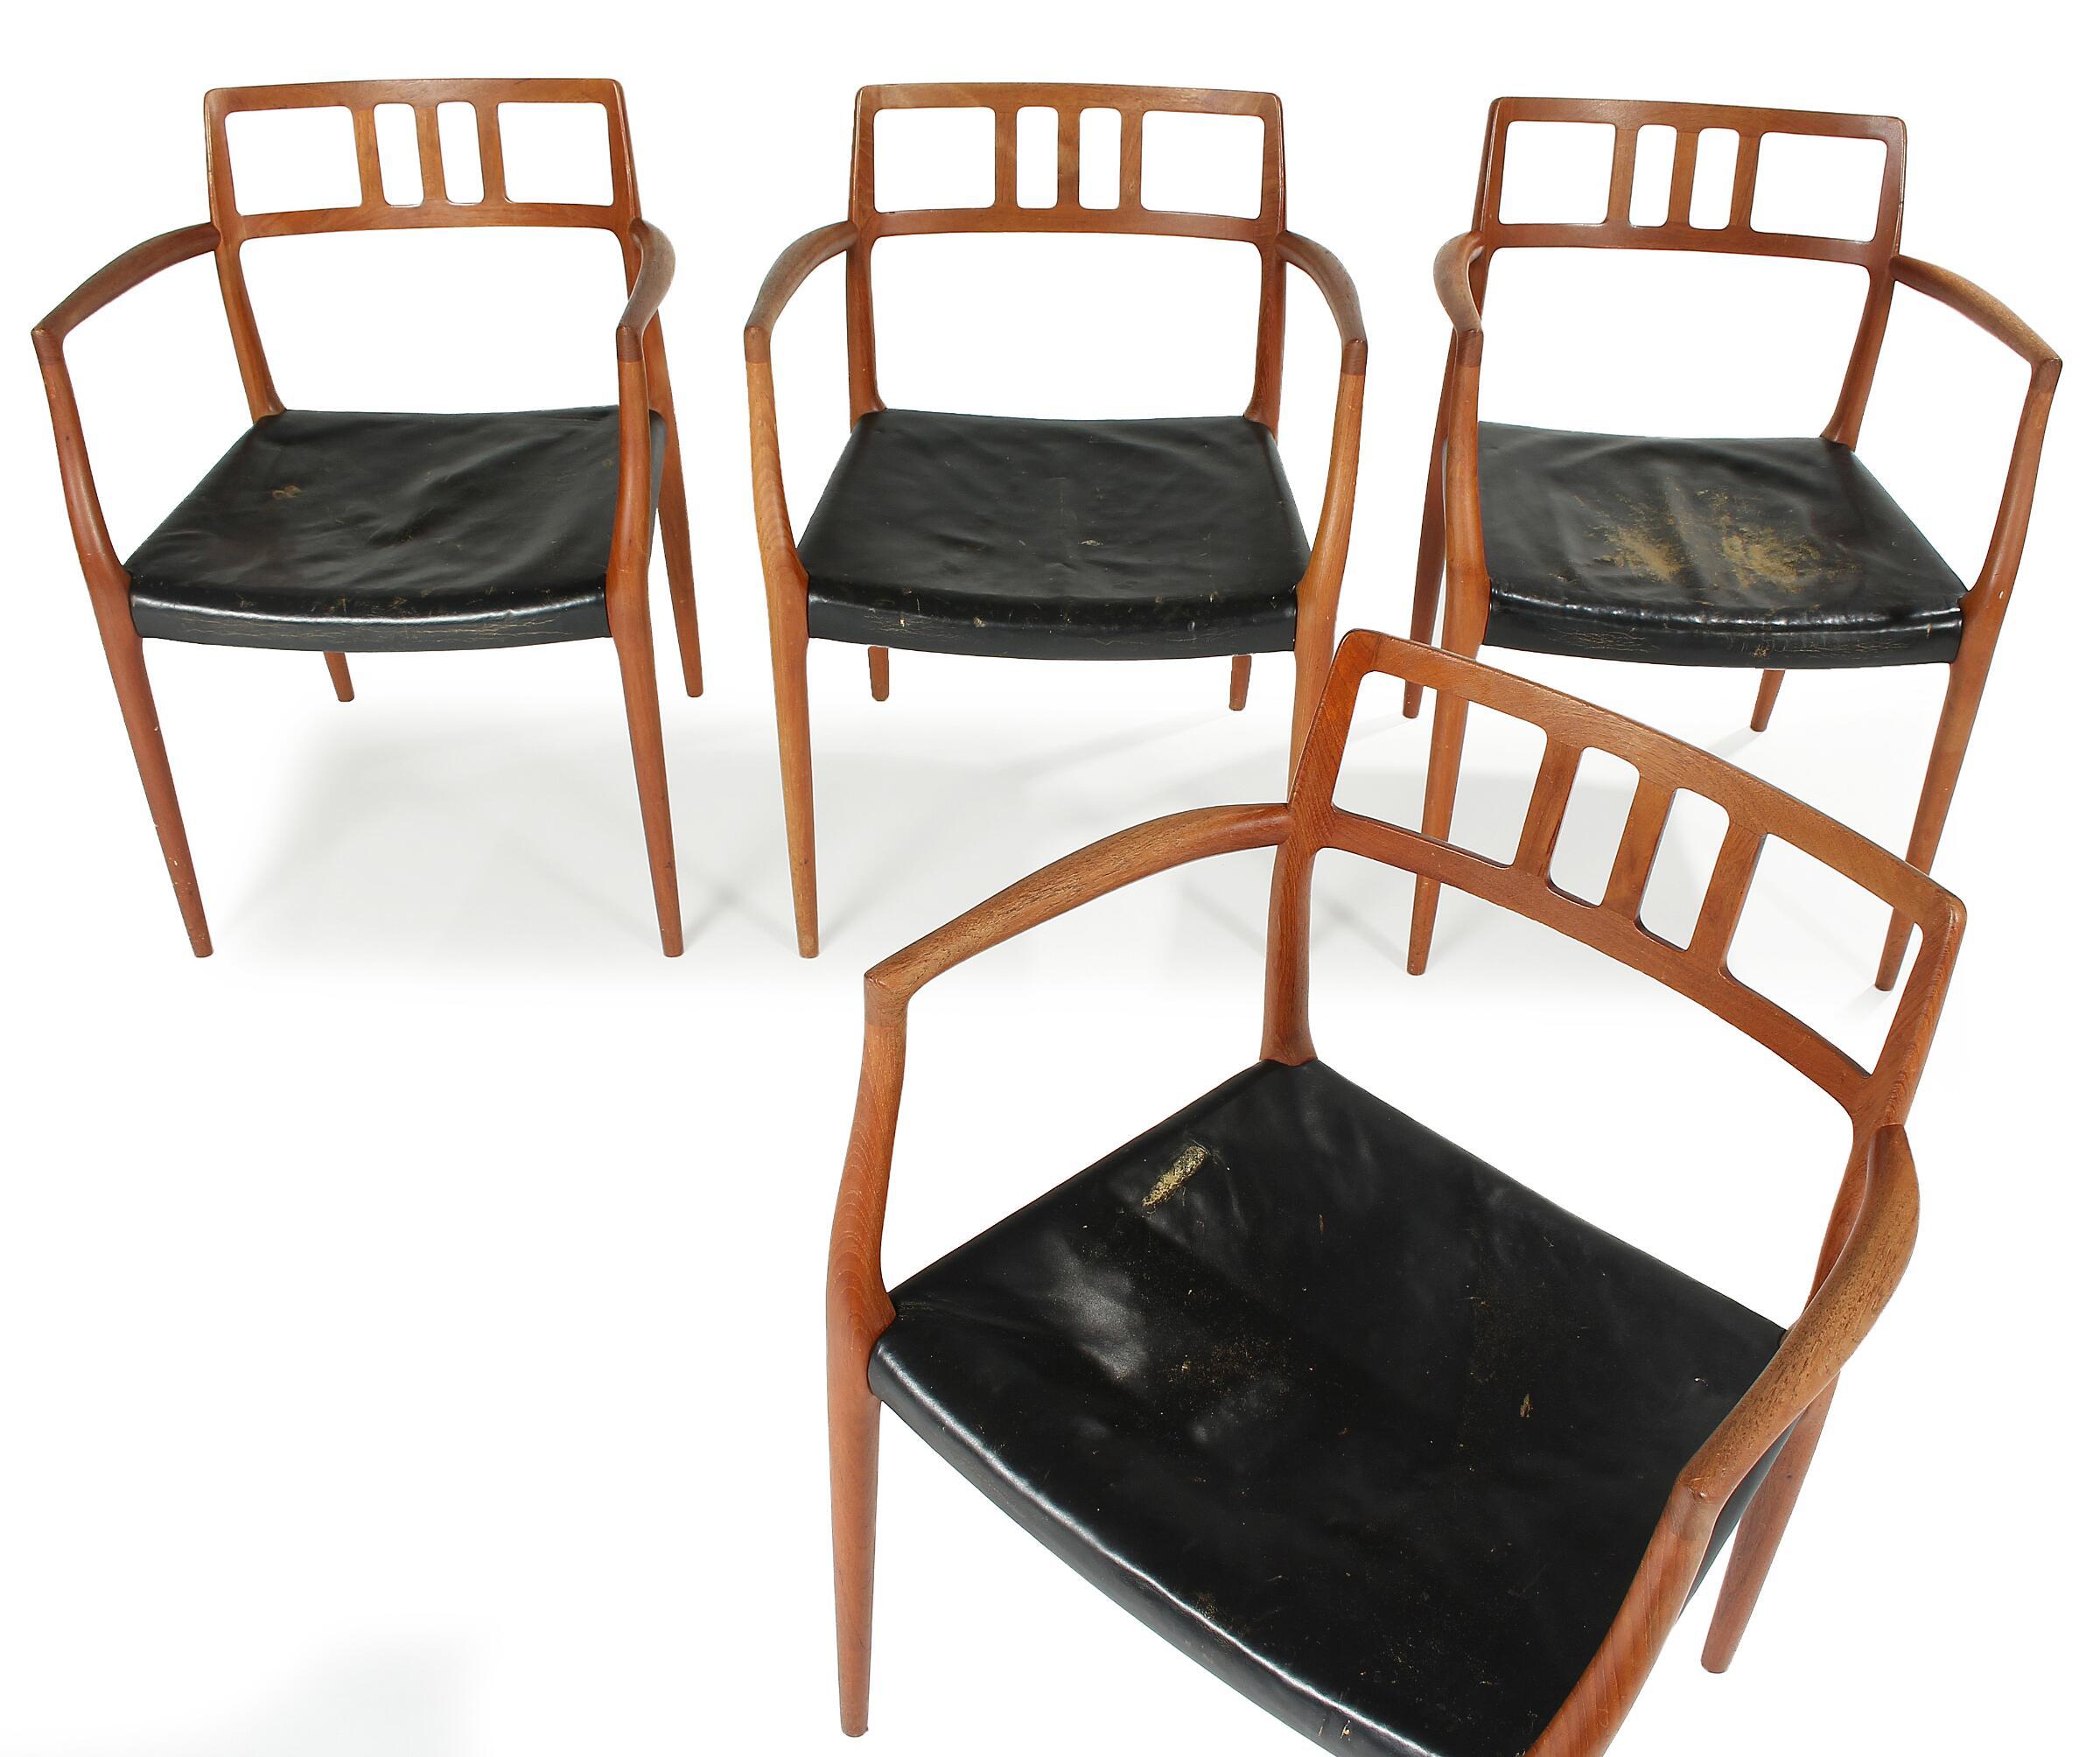 This set of four teak dining chairs by Niels Otto Moller. Round label dates these chairs as made between 1964 and 1969. Chairs require new black leather, which is included in listing price. Reupholstery in aniline black leather will take 3-4 weeks.